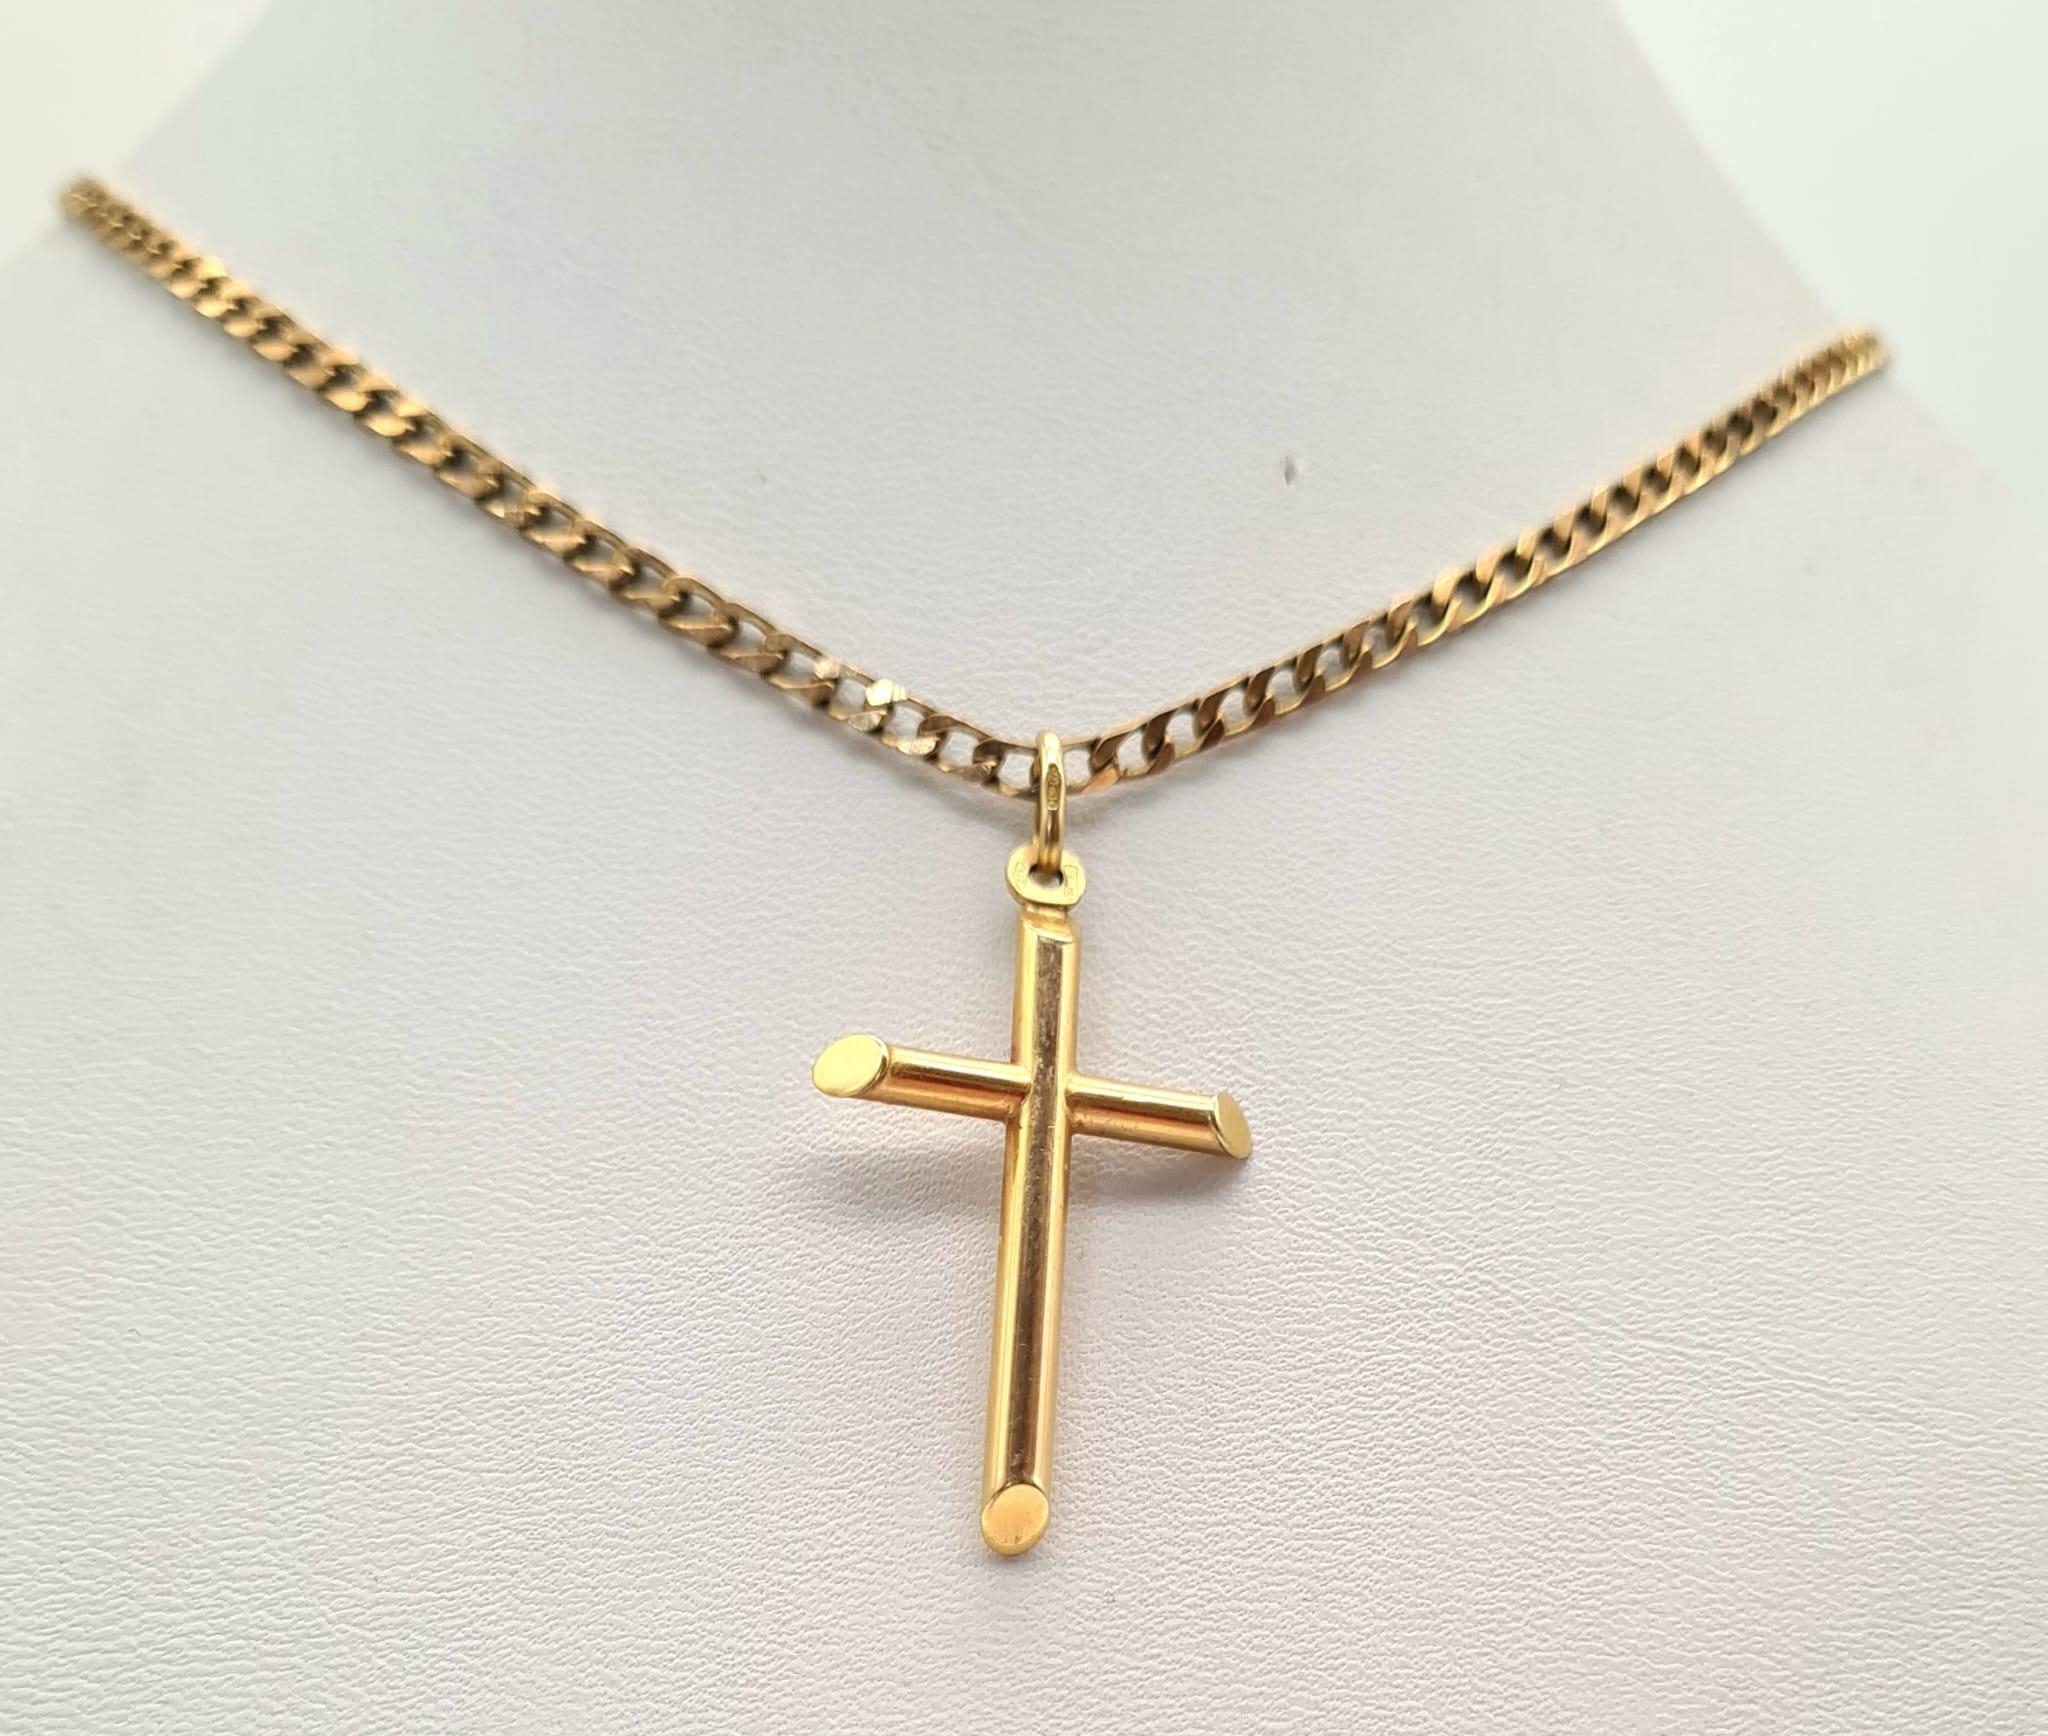 A 9K Yellow Gold Link Chain with Cross Pendant. 4 and 60cm. 11.05g total weight. Ref - 3287.